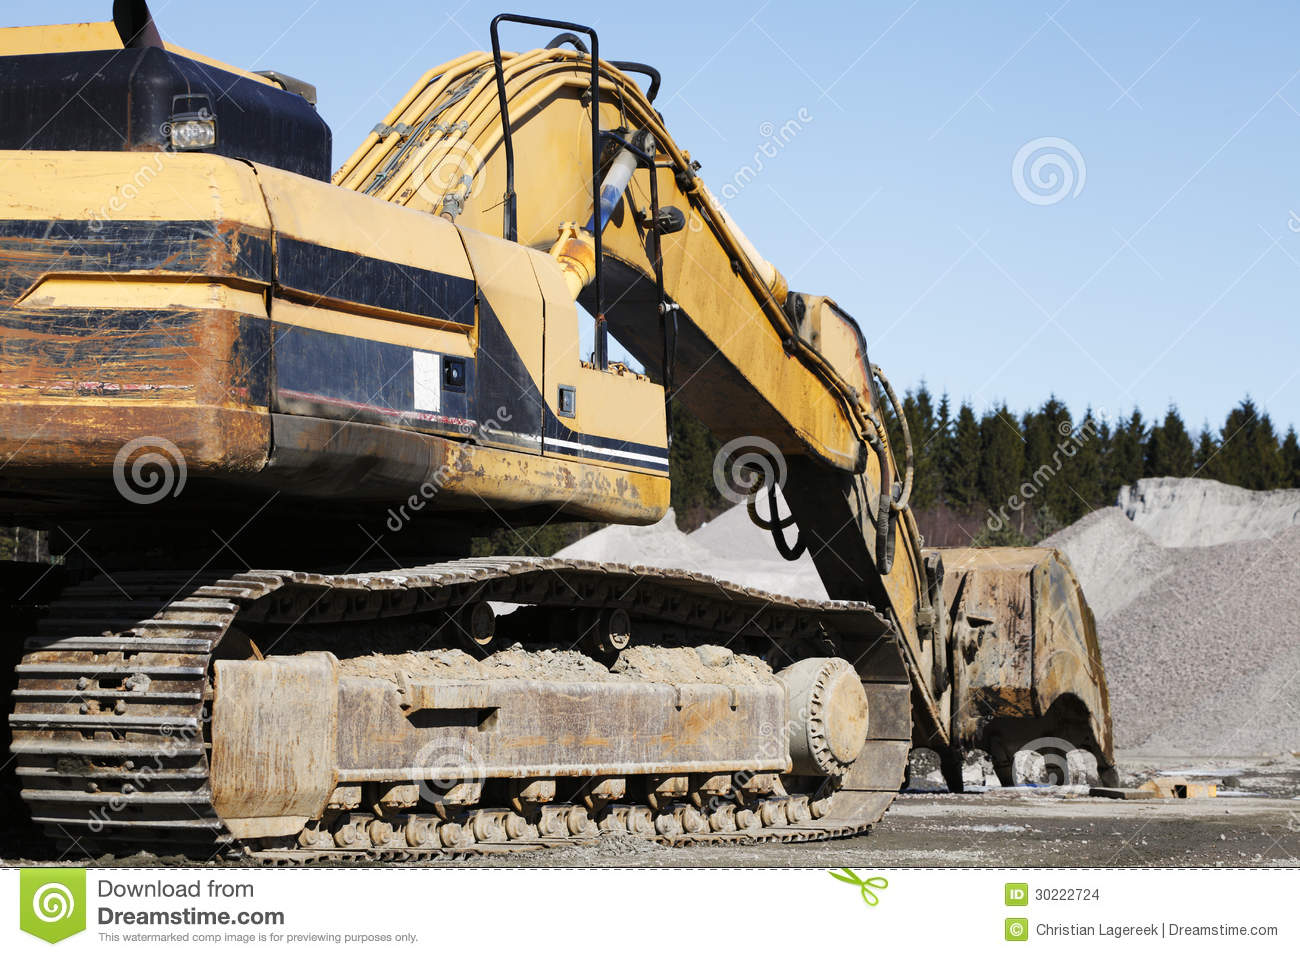 Bulldozers And Trucks In Action Stock Images   Image  30222724